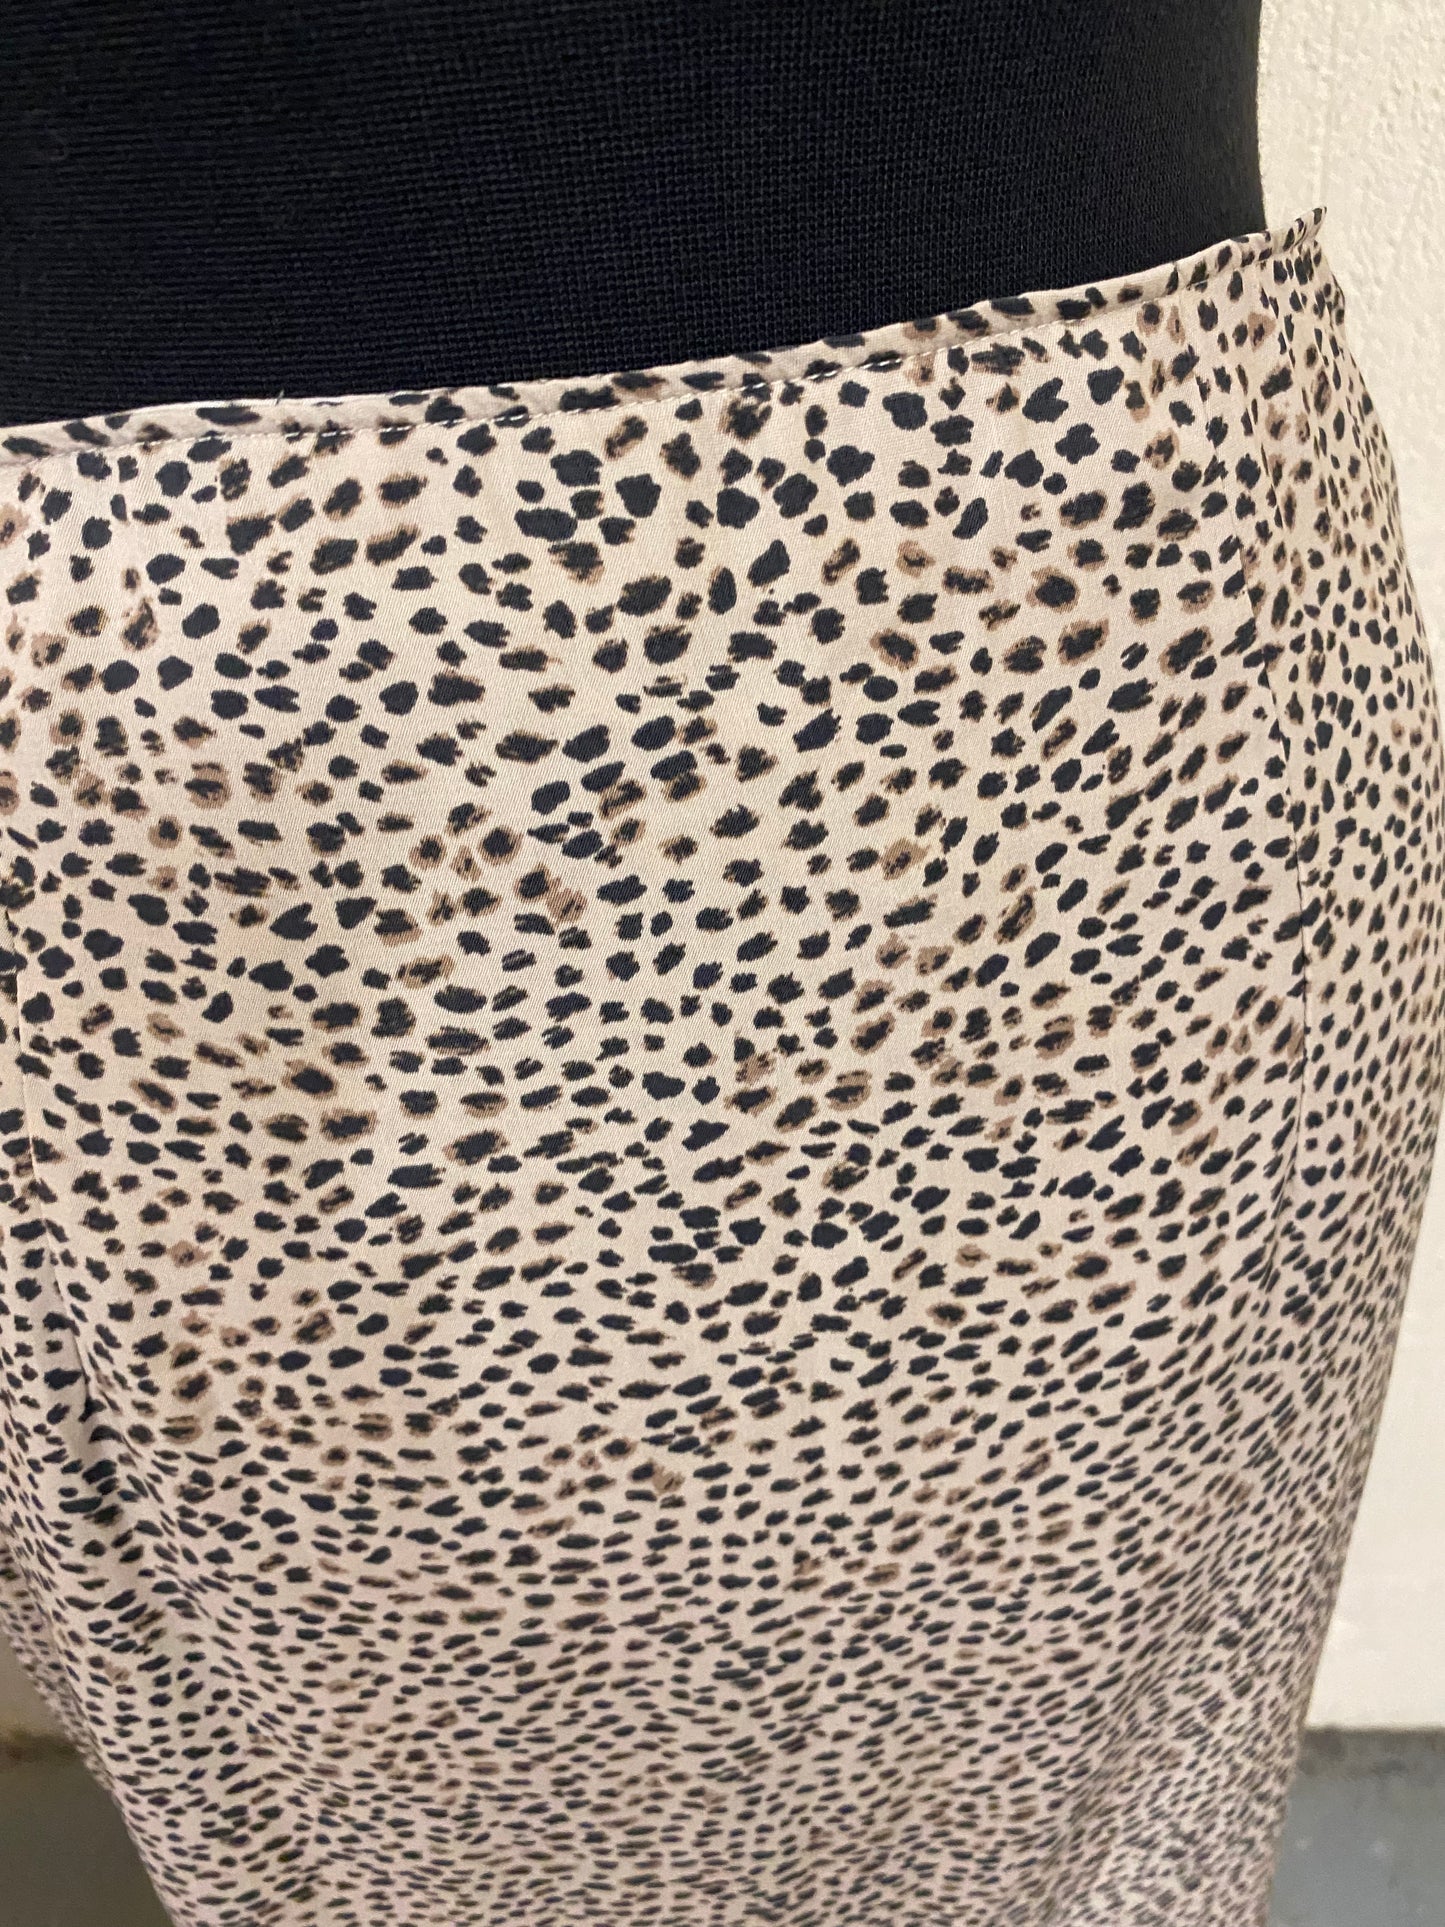 Abercrombie and Fitch Leopard Print Midi Skirt Size 10